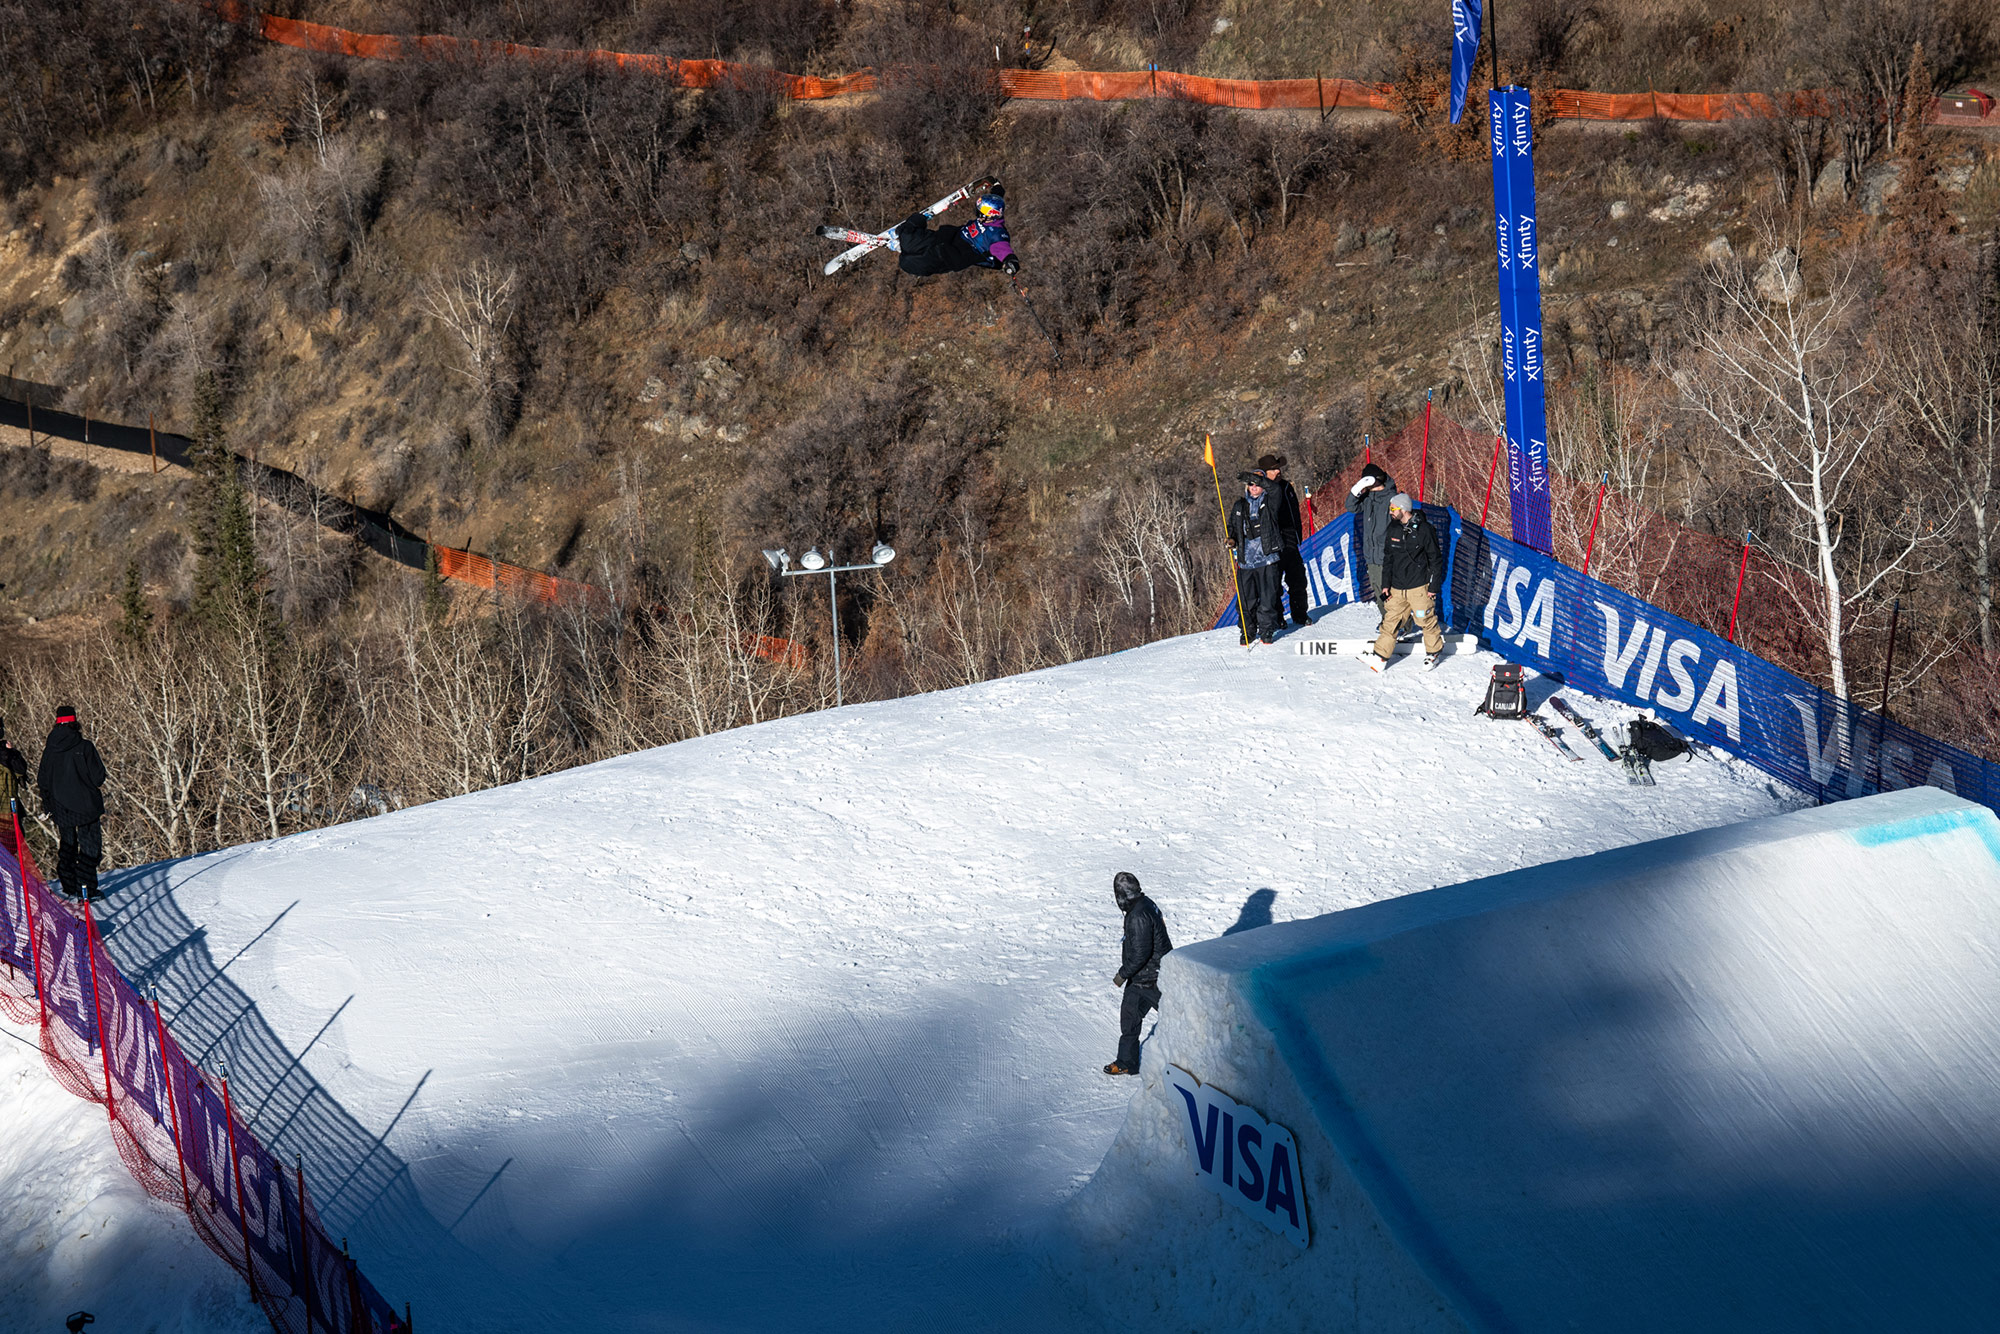 Cody LaPlante competes in the men's freeski qualifiers at the 2021 Visa Big Air in Steamboat, Colorado.